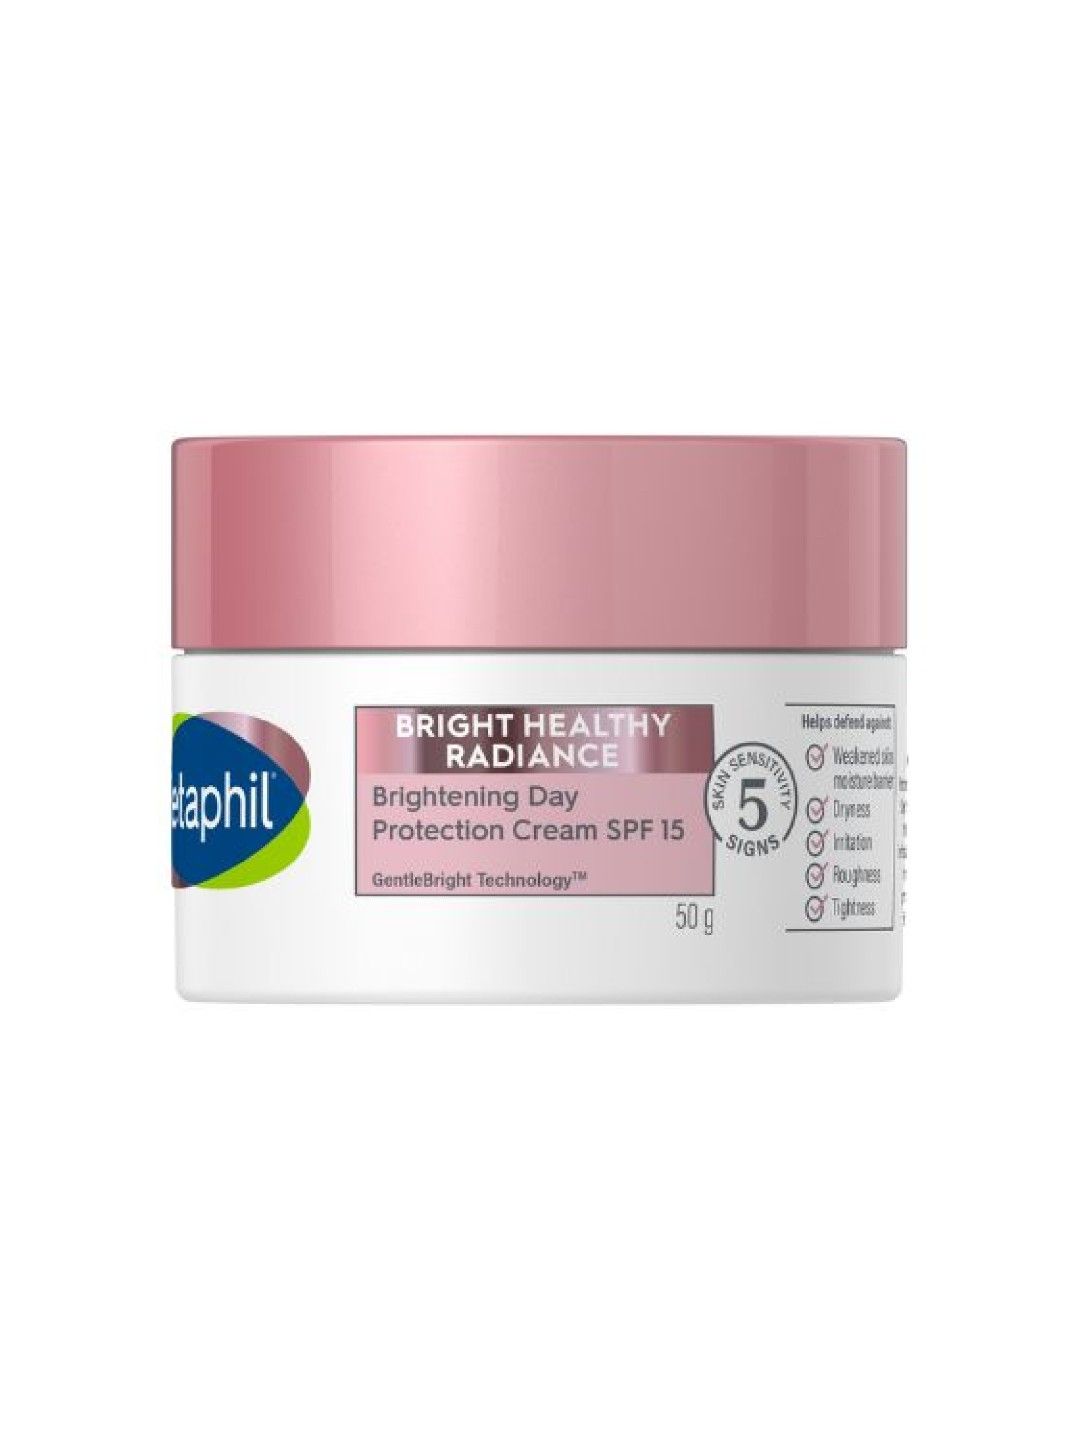 Cetaphil Brightening Day Protection Cream SPF15 (50g) (No Color- Image 2)